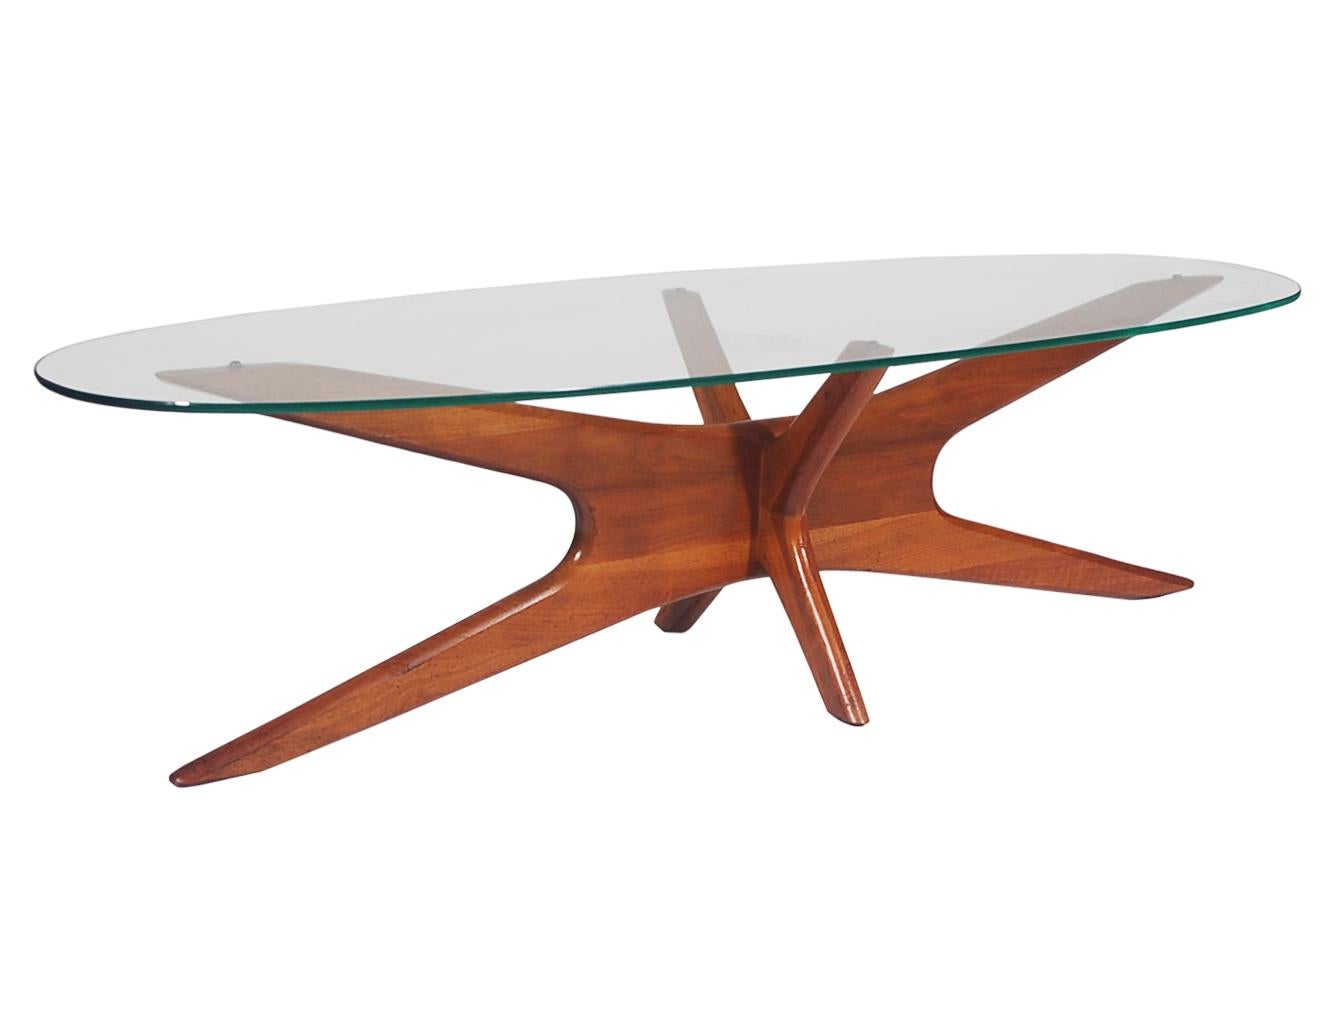 A Classic design by a Classic American designer and furniture builder, Adrian Pearsall. This table features an elongated oval glass top with a sculpted solid walnut base. Very well cared for through the years.